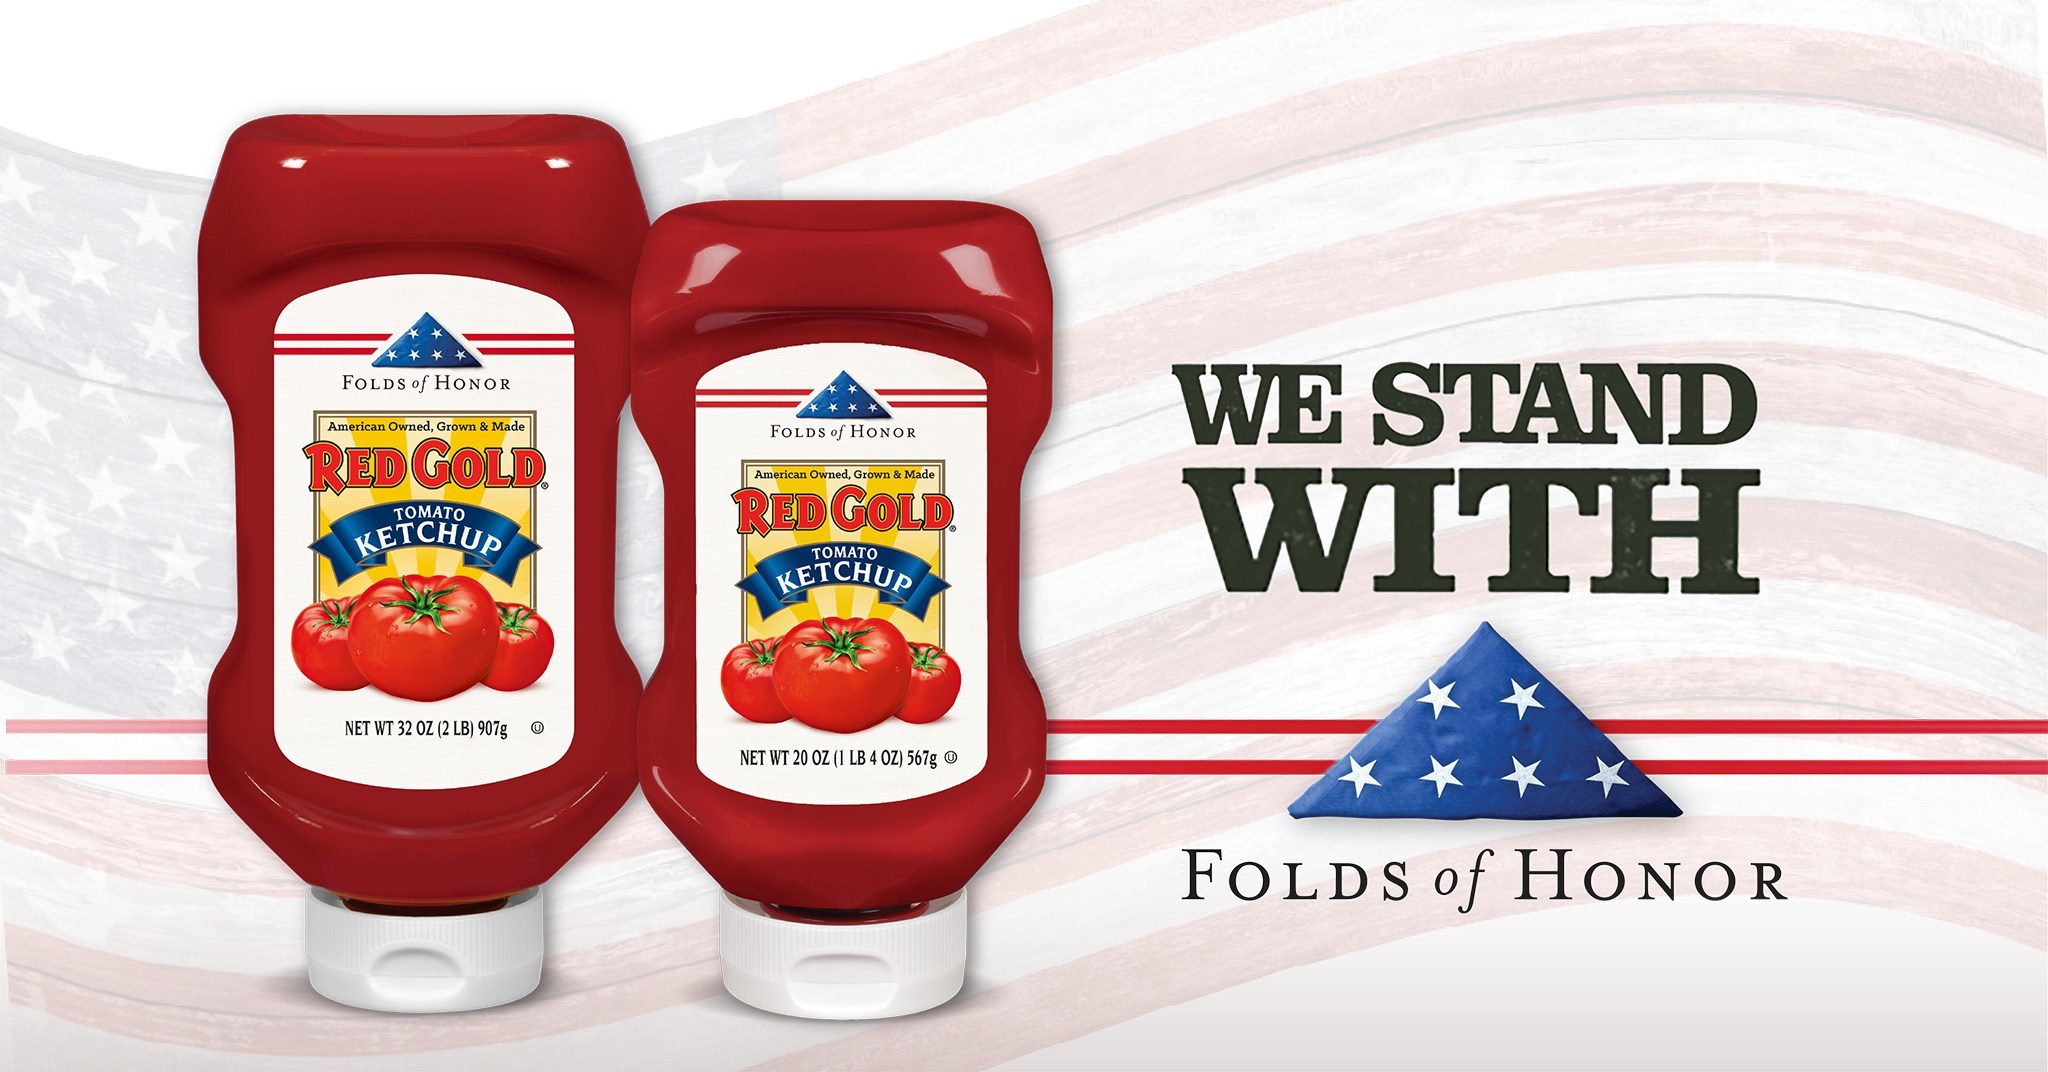 https://mma.prnewswire.com/media/1198007/Red_Gold_Tomatoes_and_Folds_of_Honor_Ketchup.jpg?p=facebook